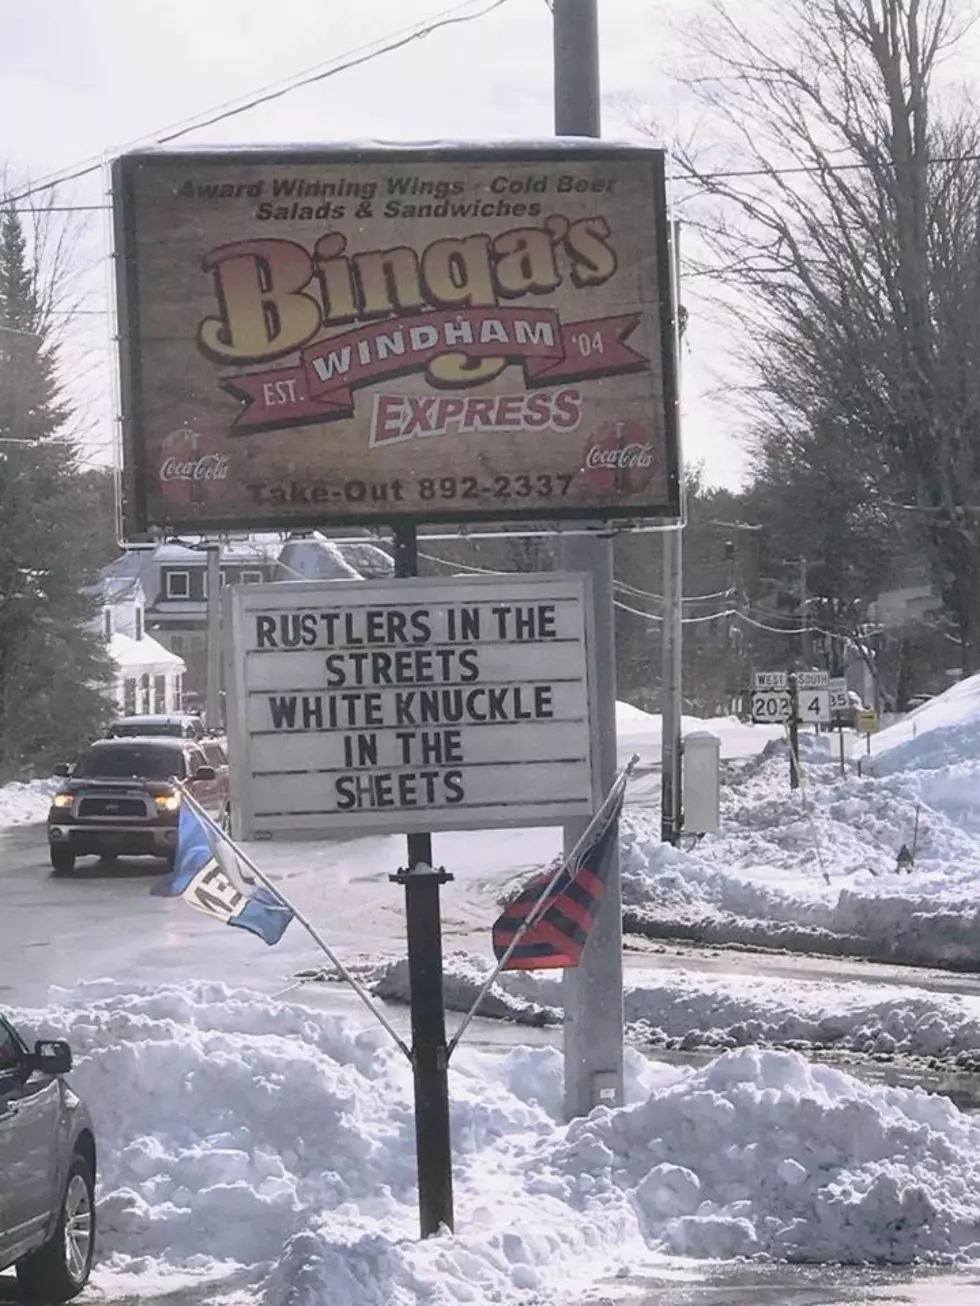 Binga&#8217;s Windham Is Still The King When It Comes To Signs [PHOTOS]